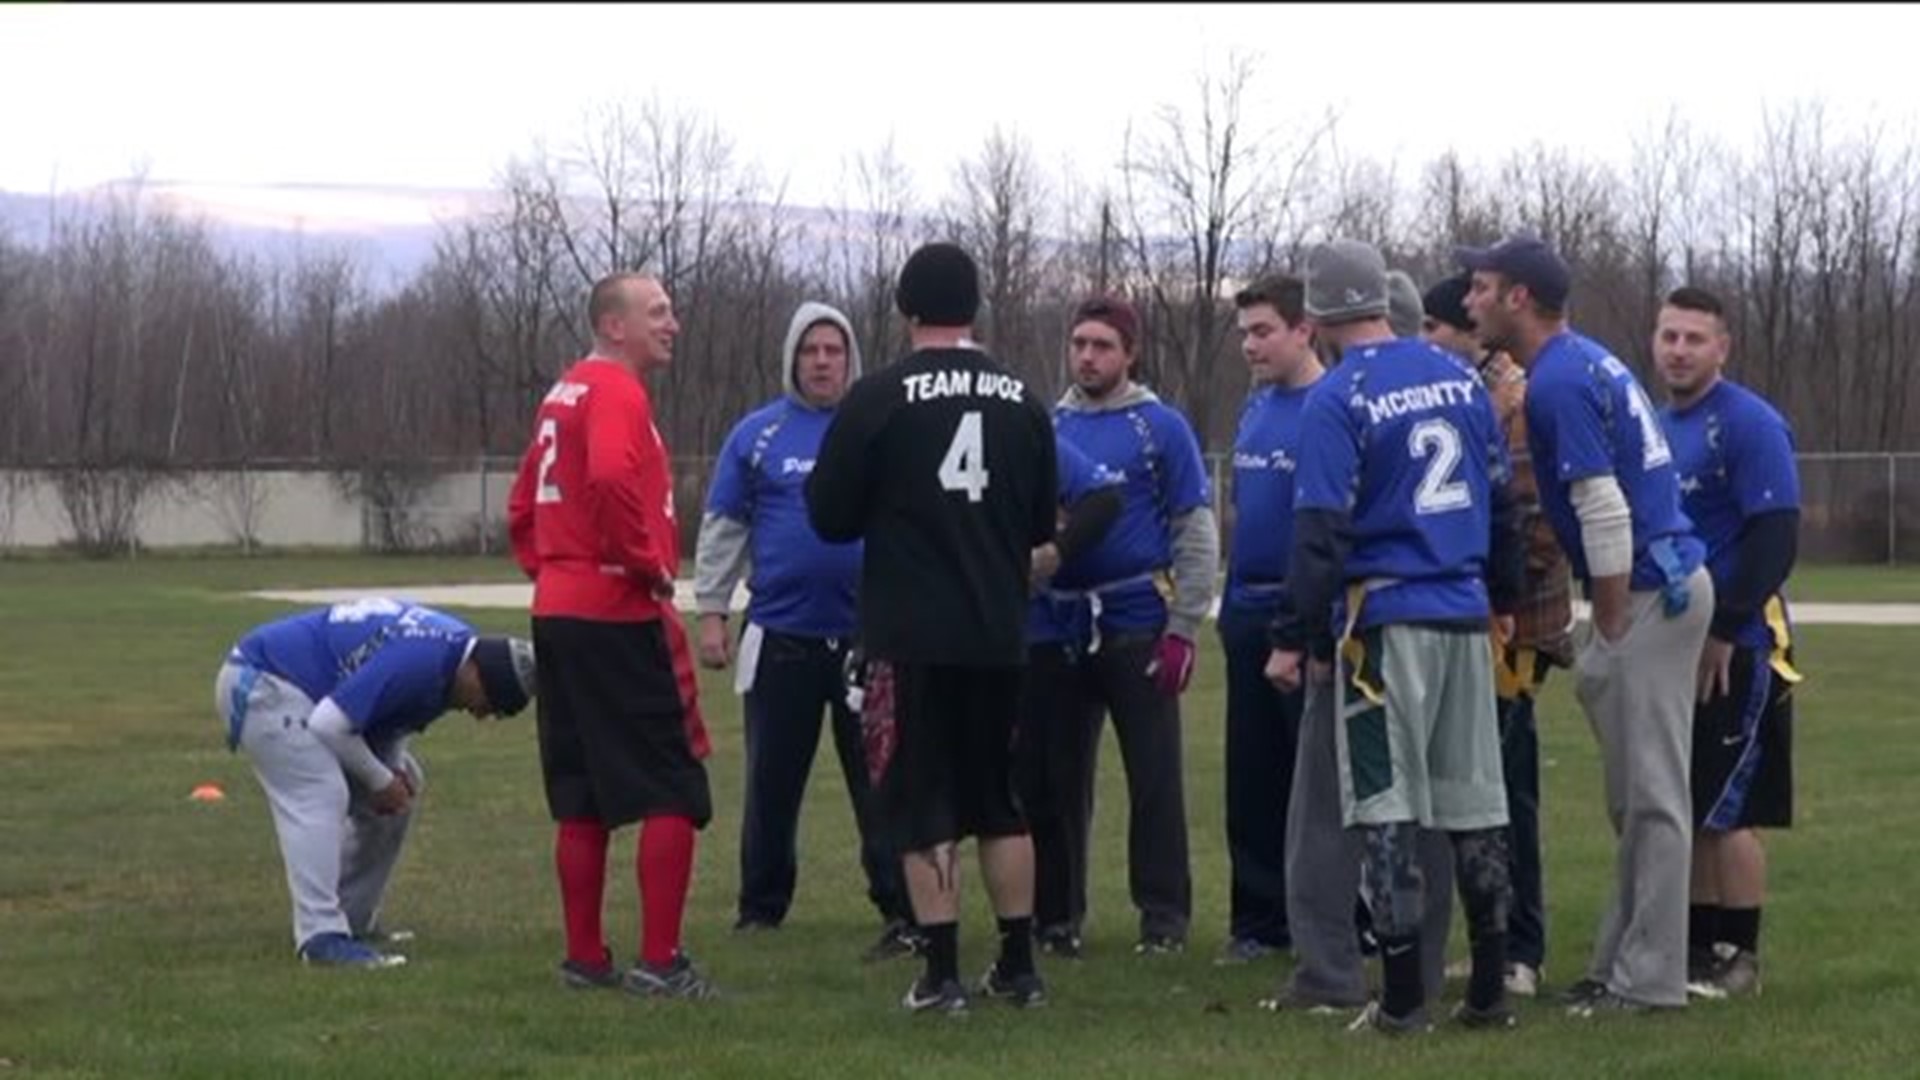 Firefighters' Football Game Raises Money to Buy Christmas Presents for Children